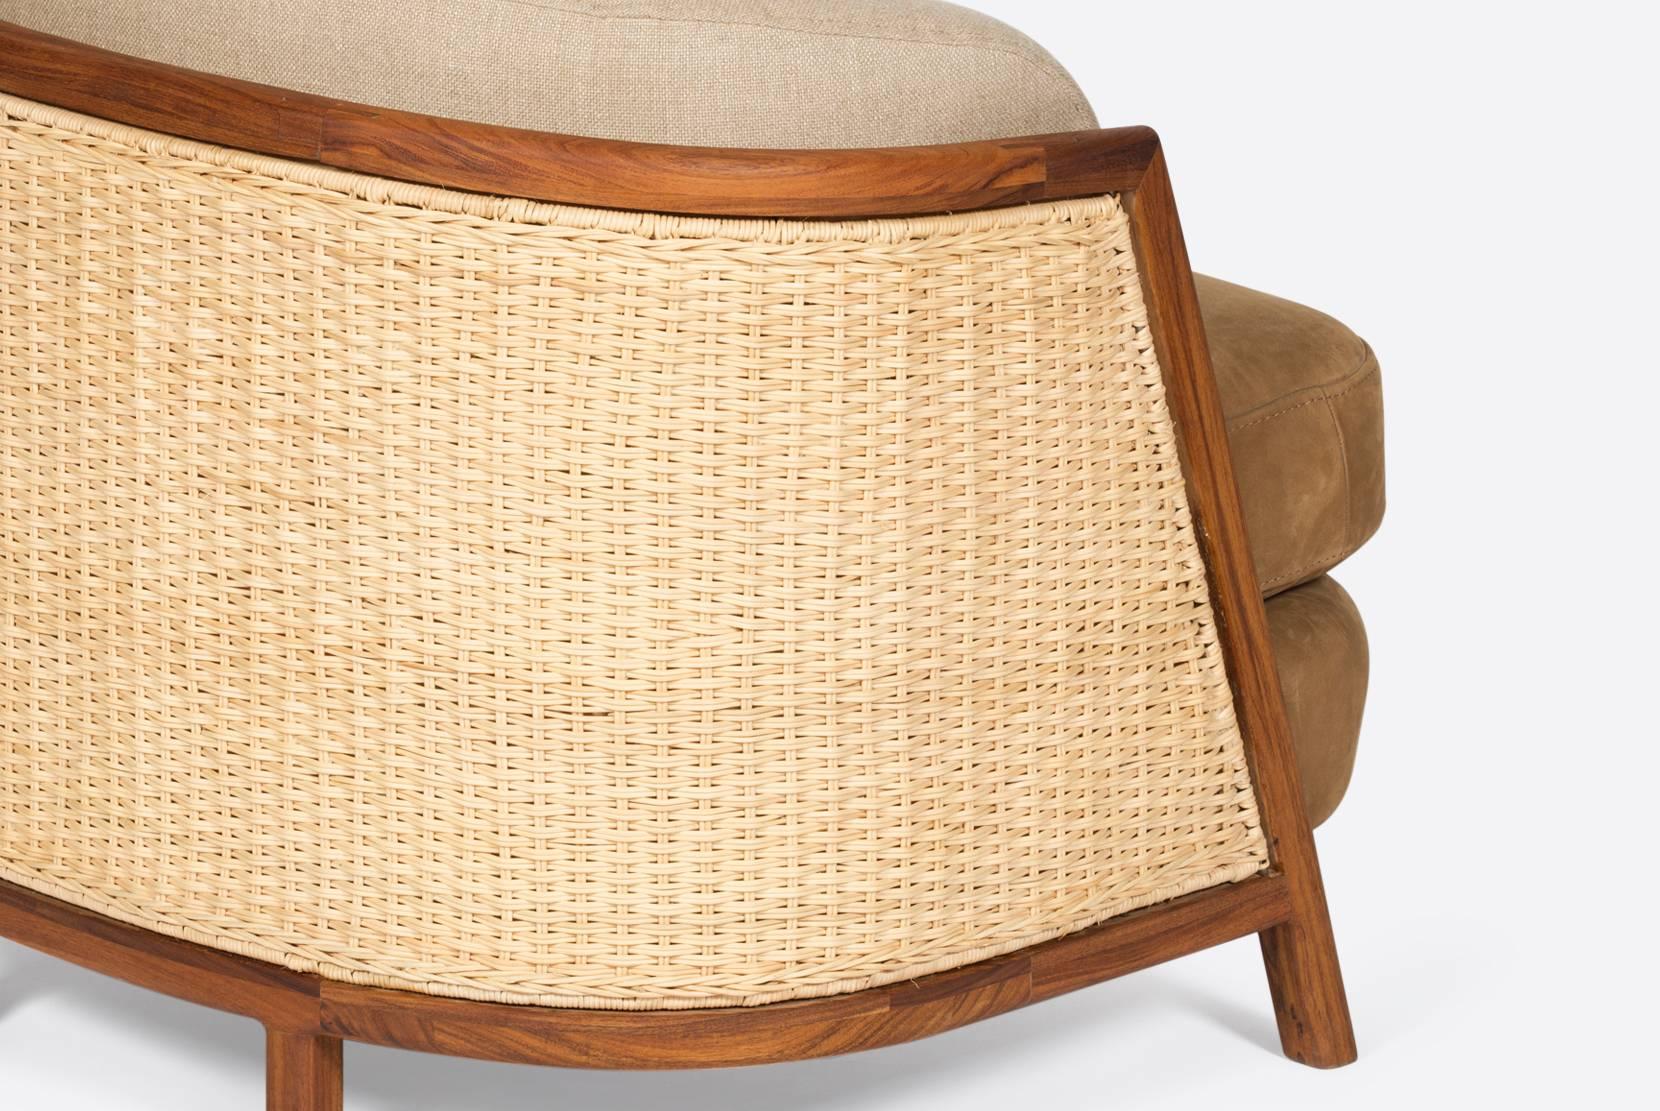 This comfortable sofa, with a stylish wicker back, is made of walnut hardwood and aims to enhance the work of artisans in Mexico. The rattan back provides sophistication and a warm touch to the piece.